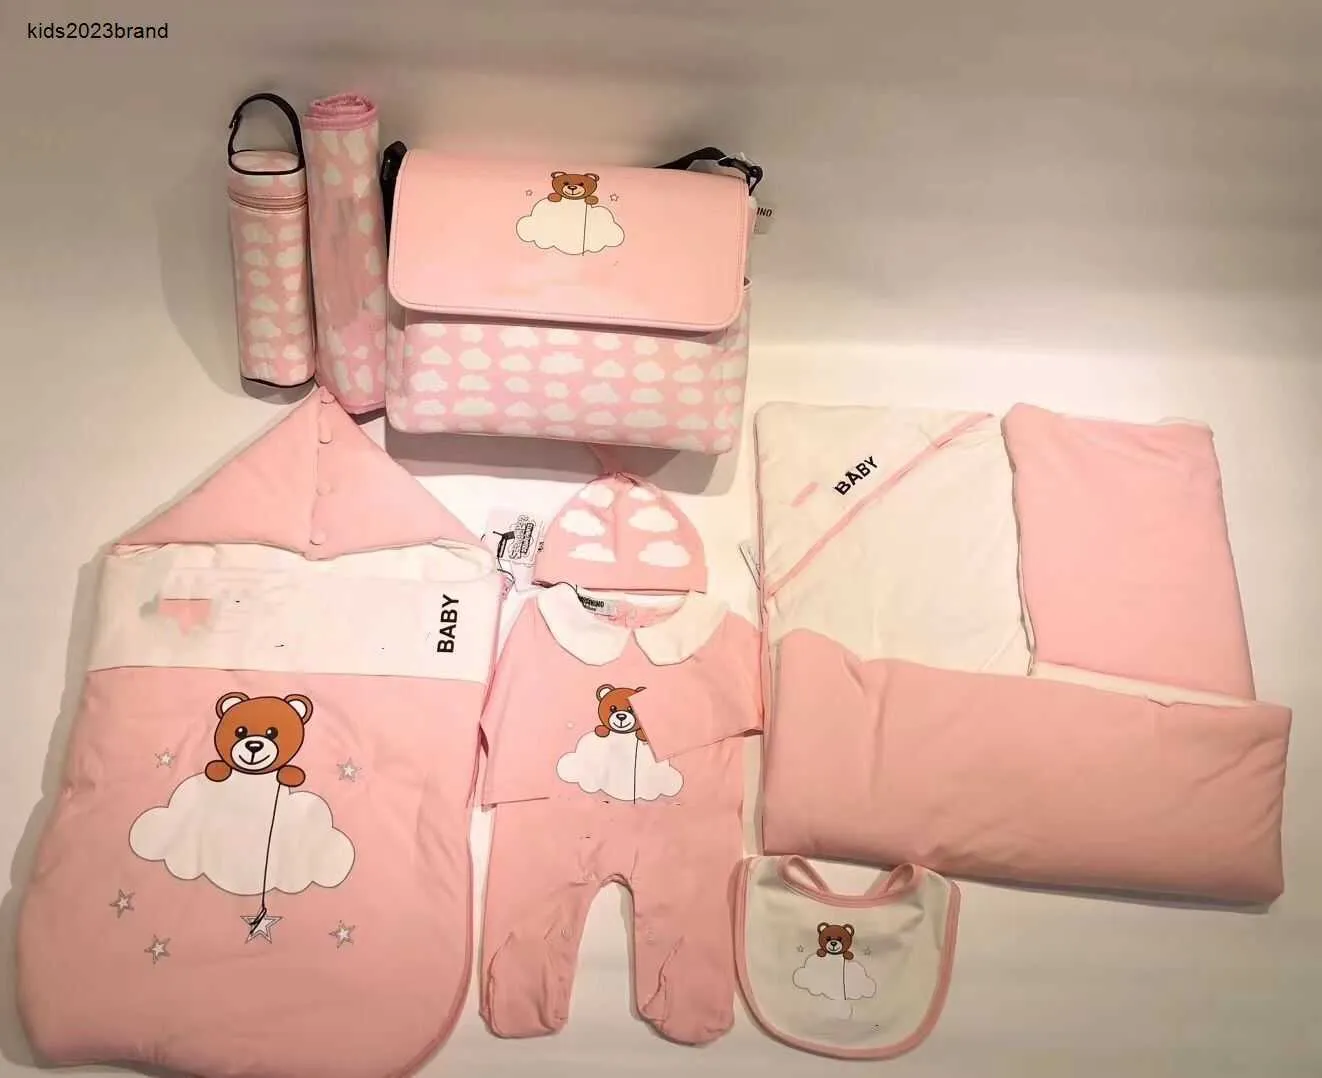 New Newborn Baby Jumpsuit Sleeping Bags Infant kids Sleep Wear Warm Bedding girls boys jumpsuits with hat and bib and diaper bag